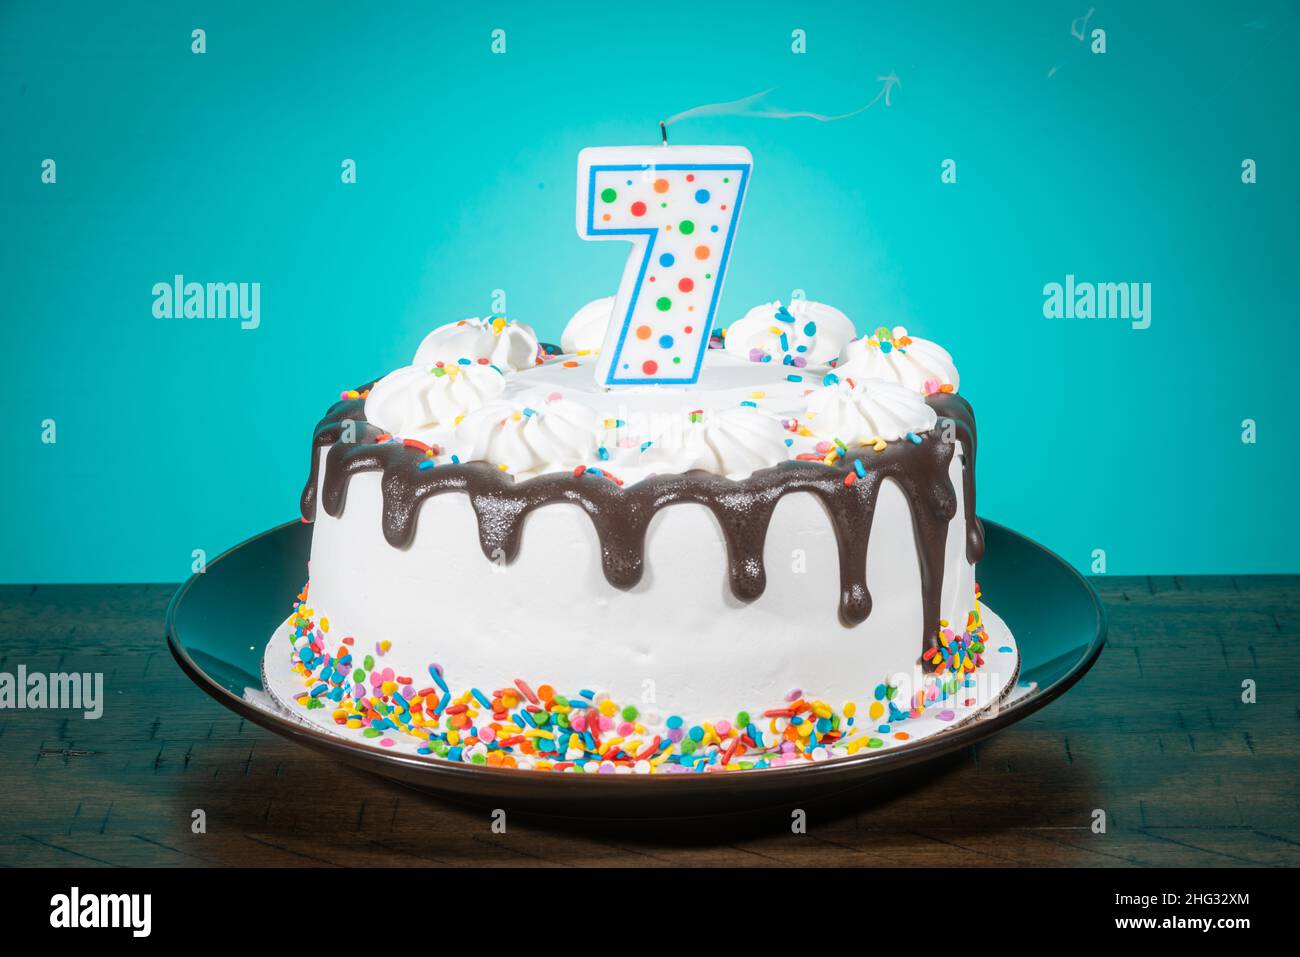 A birthday cake bears a candle in the shape of the number 7. Stock Photo